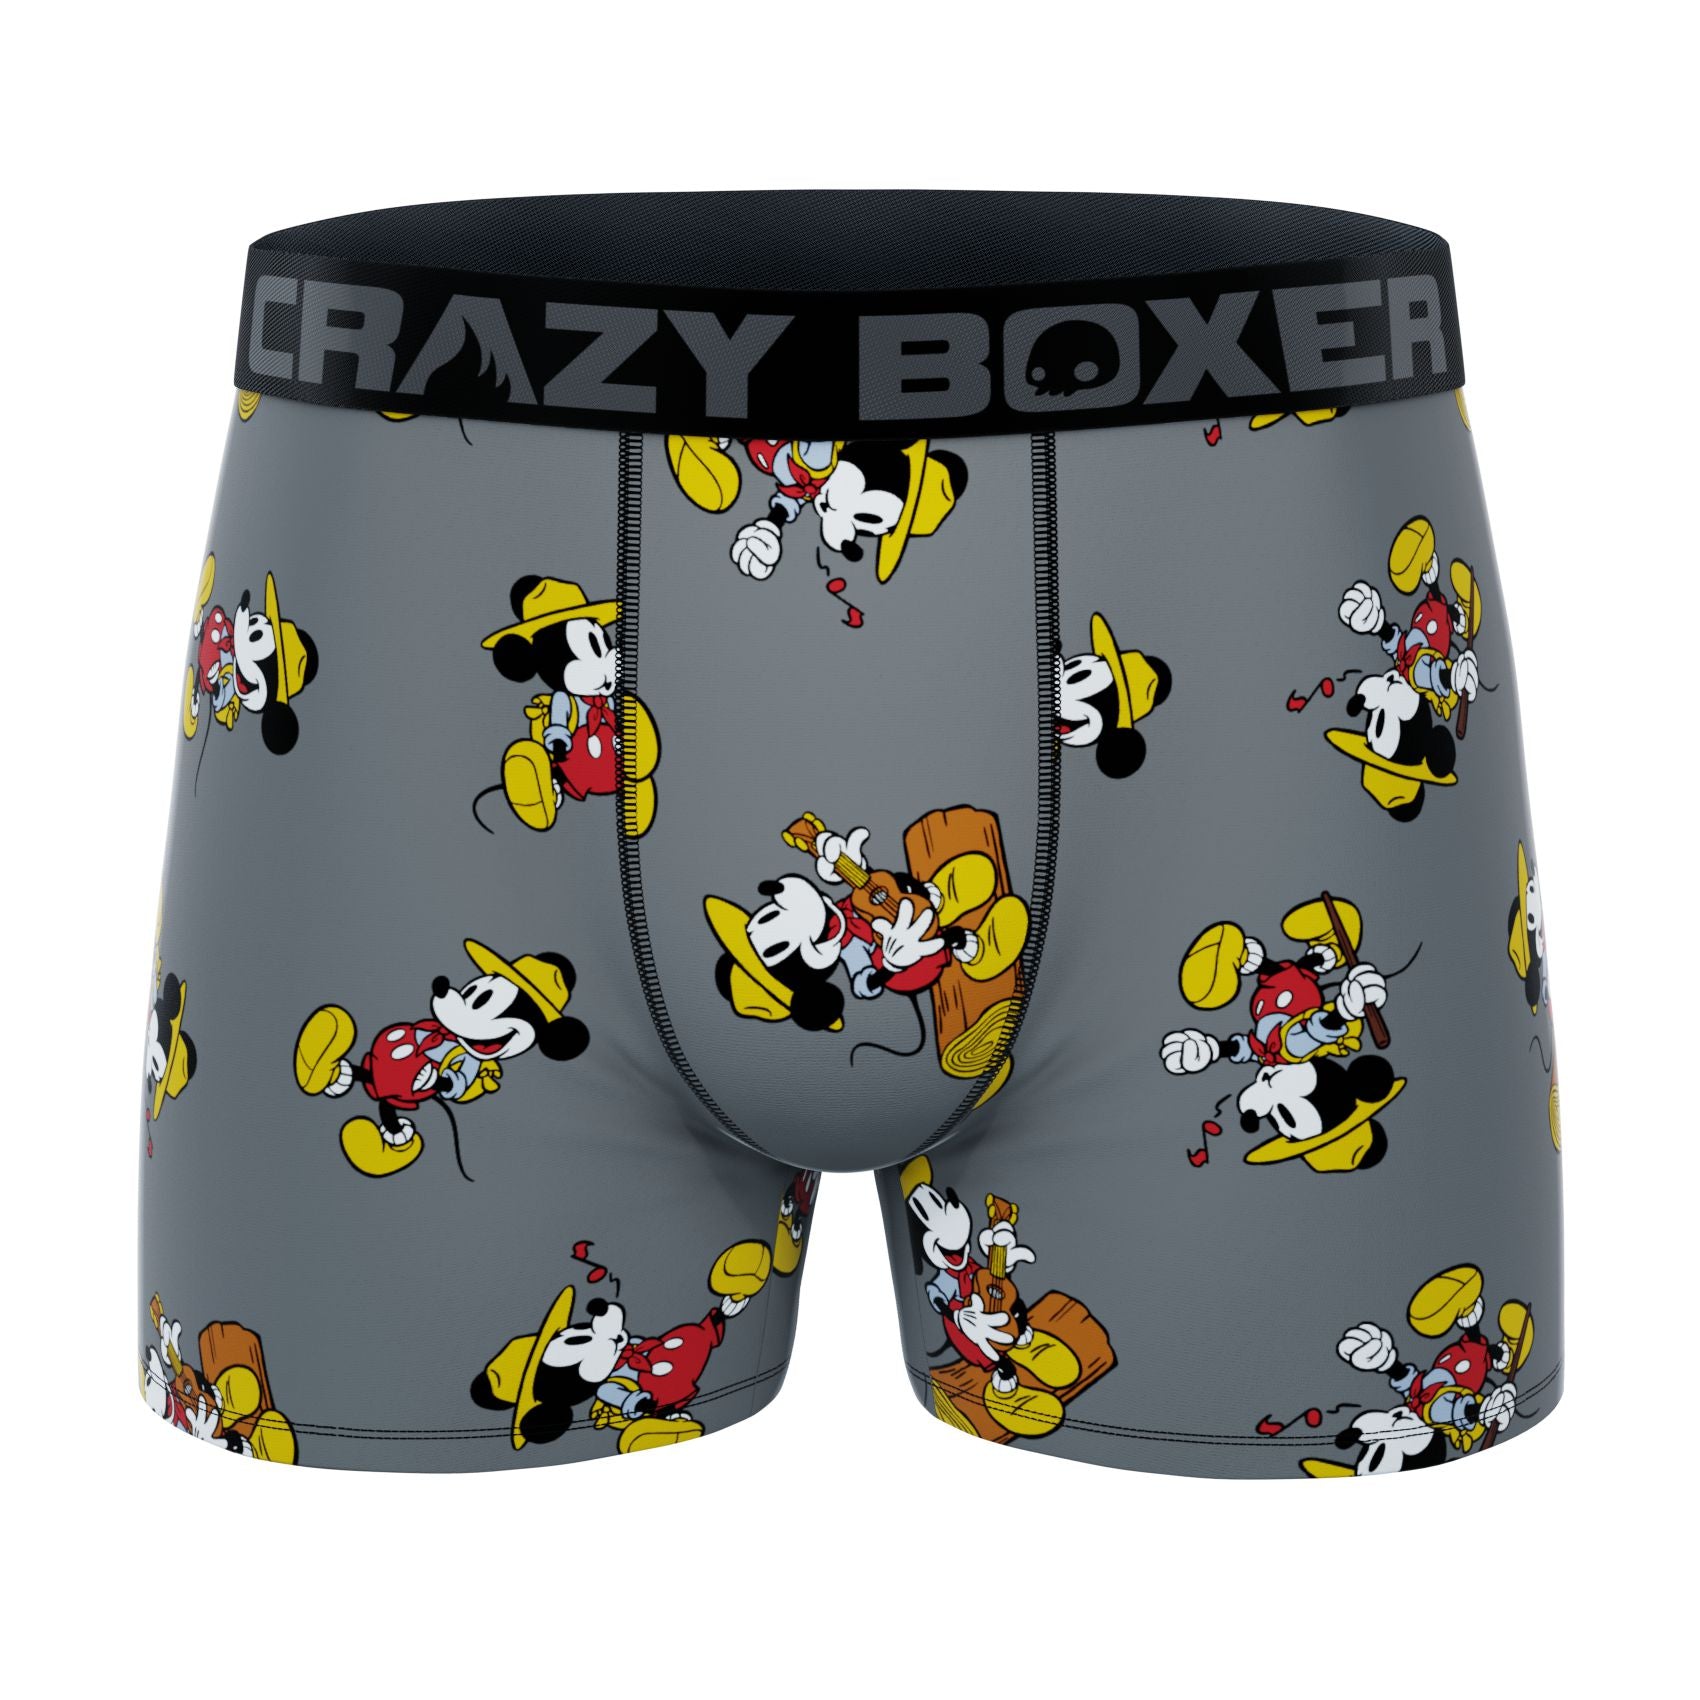 Mickey Mouse Middle Finger Men's Boxer Briefs 